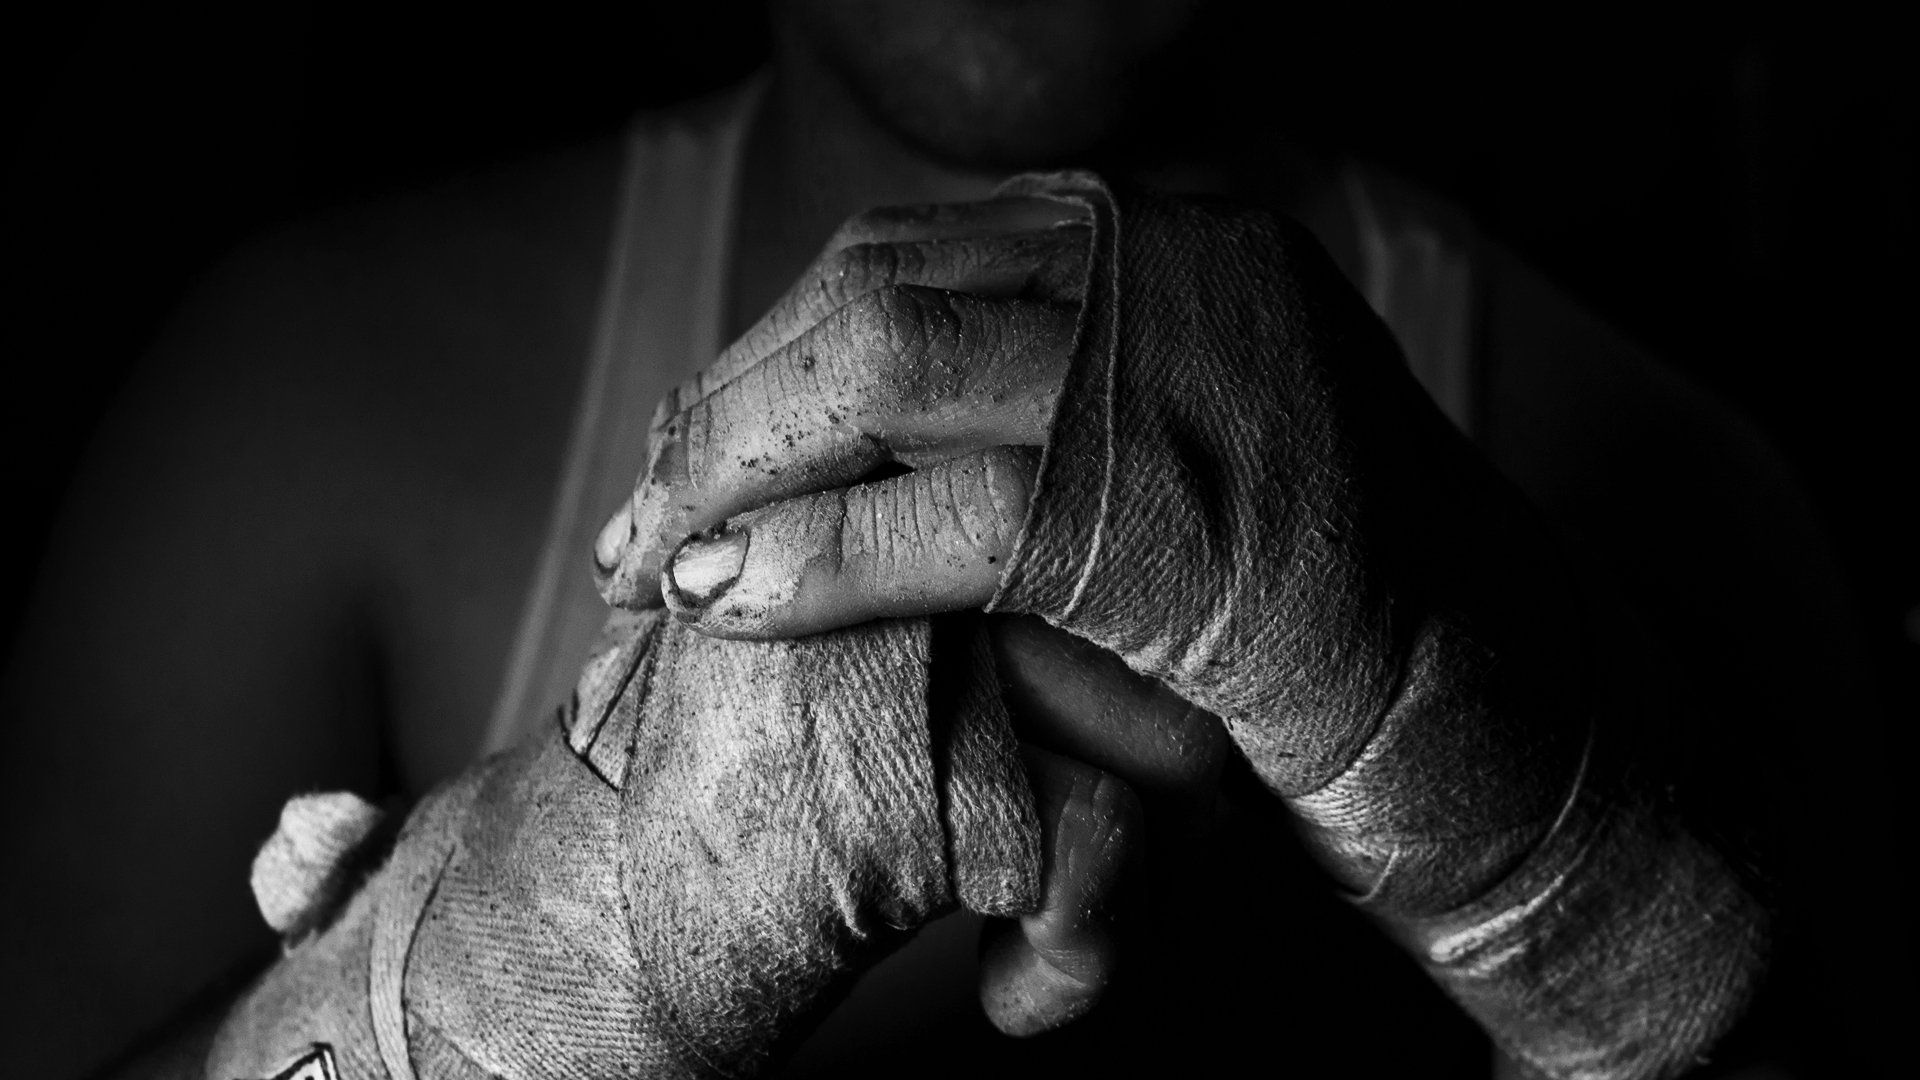 fighting mma extreme people hands blood black et white b w wallpaper